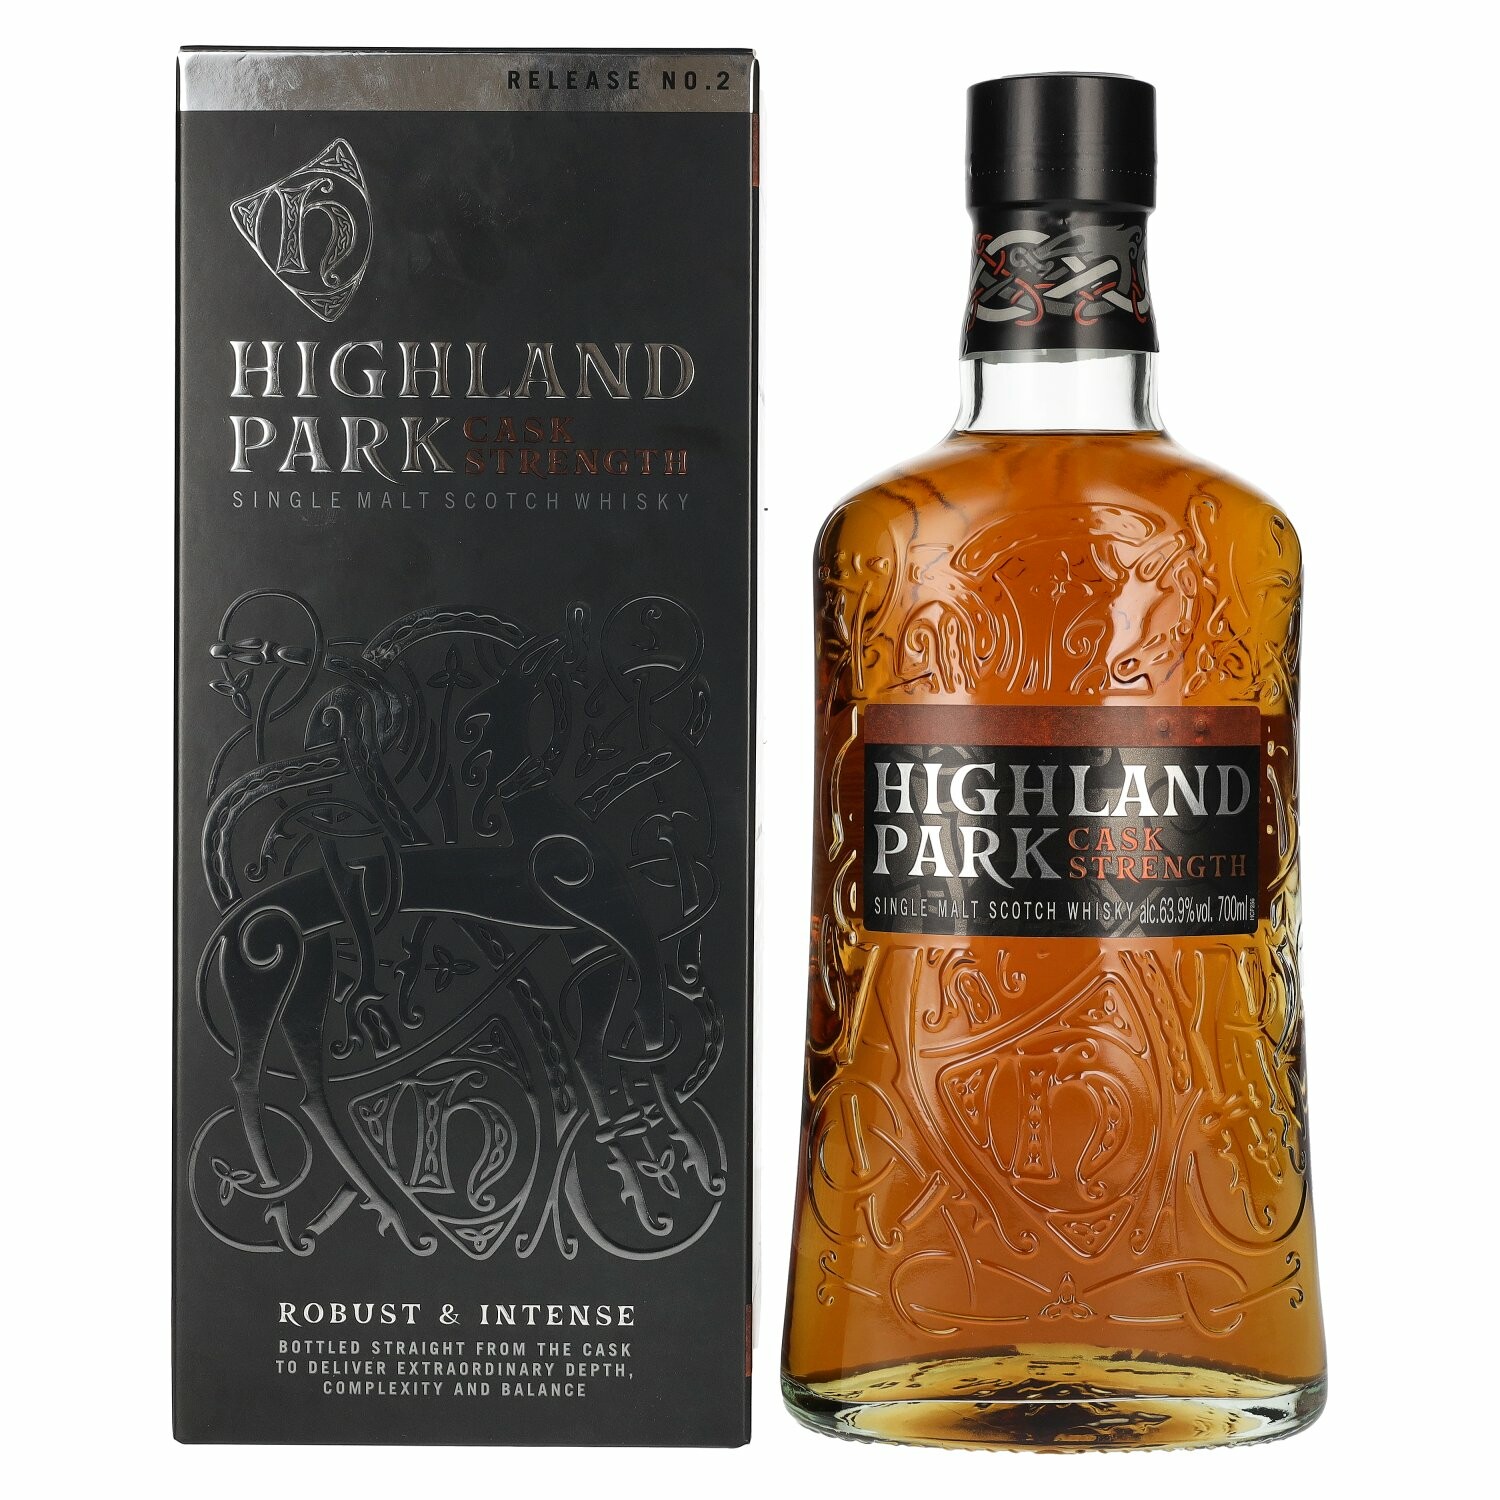 Highland Park CASK STRENGTH Release 2 63,9% Vol. 0,7l in Giftbox